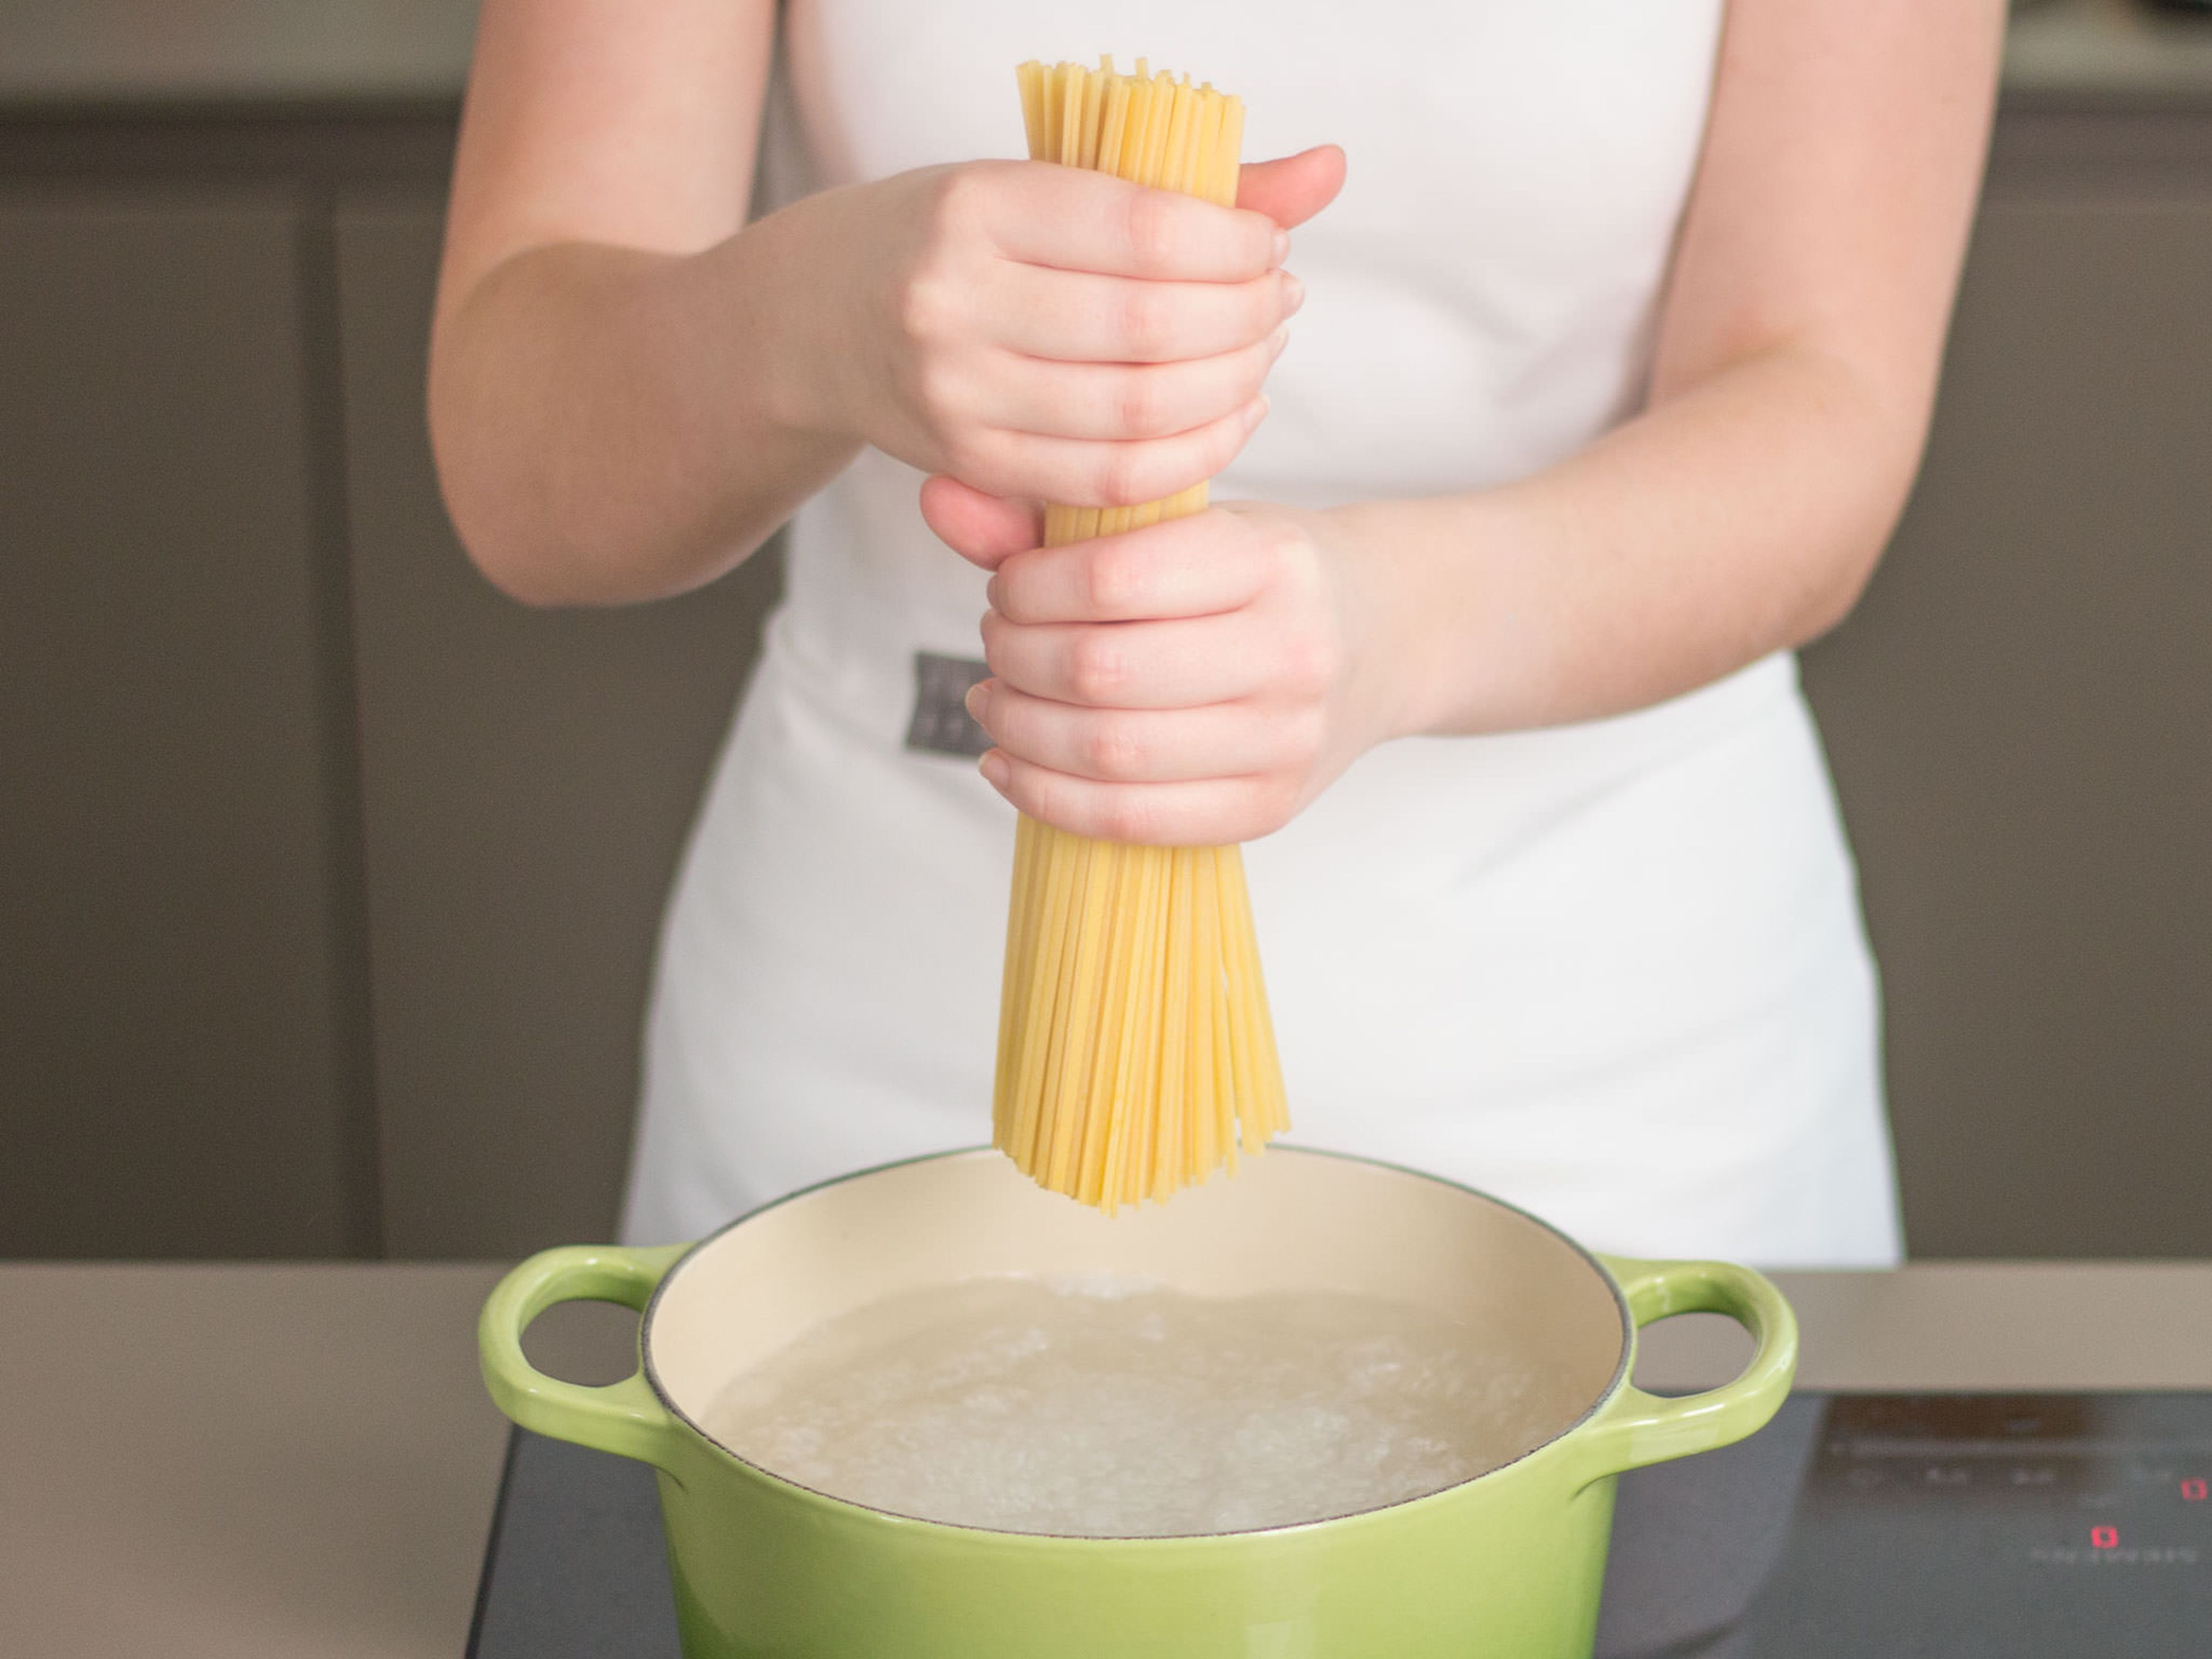 In a large saucepan, cook linguine in salted boiling water over medium heat for approx. 7 – 12 min. until al dente. Drain and set aside. Reserve a small amount of pasta water for step 4.